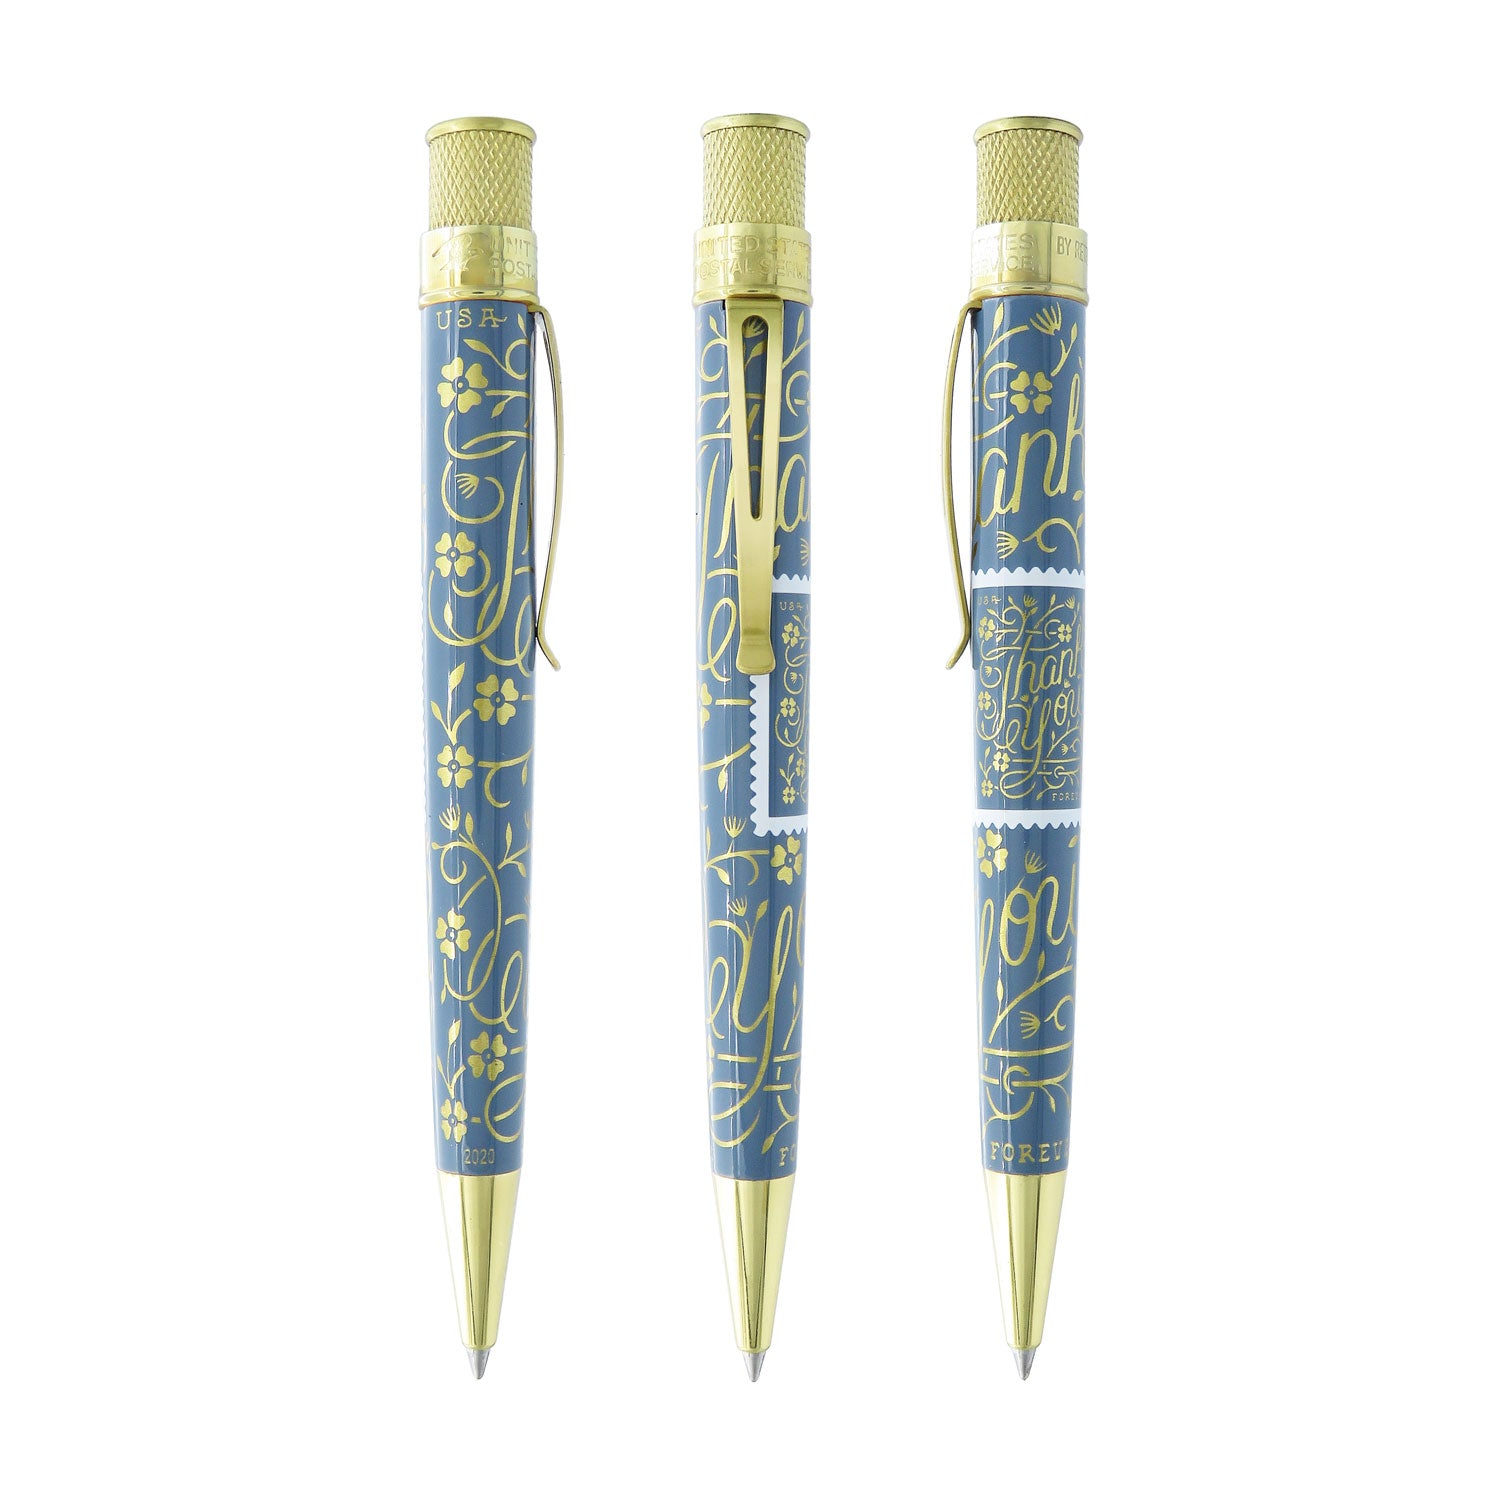 Retro 51 Officially Licensed United States Postal Service "Thank You" Stamp Rollerball Pen